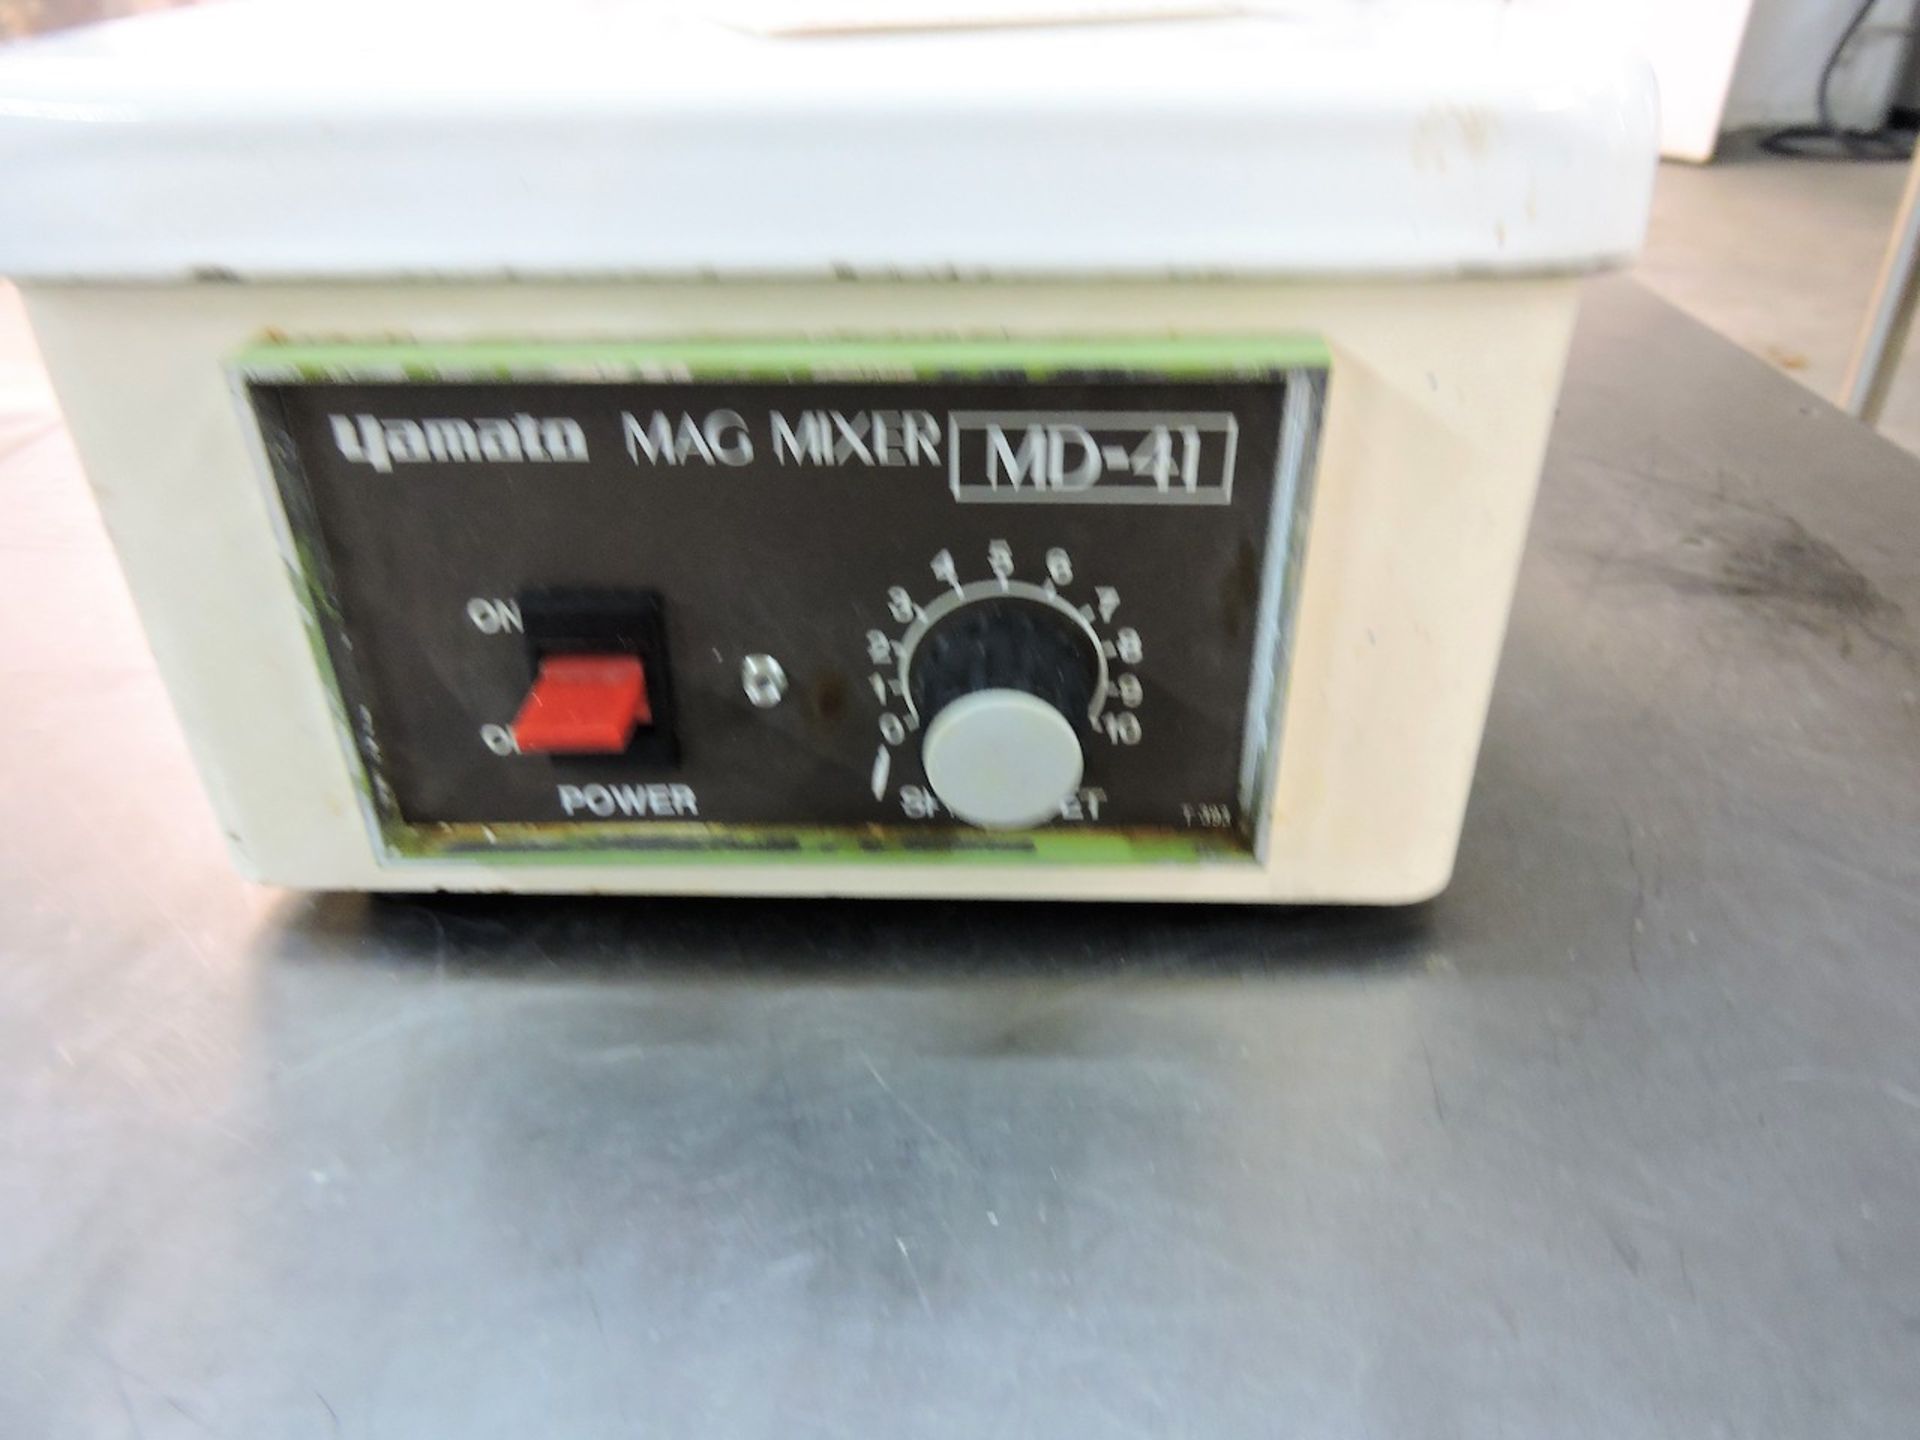 YAMATO SCIENTIFIC MODEL MD41 MAGNETIC MIXER - Image 2 of 2